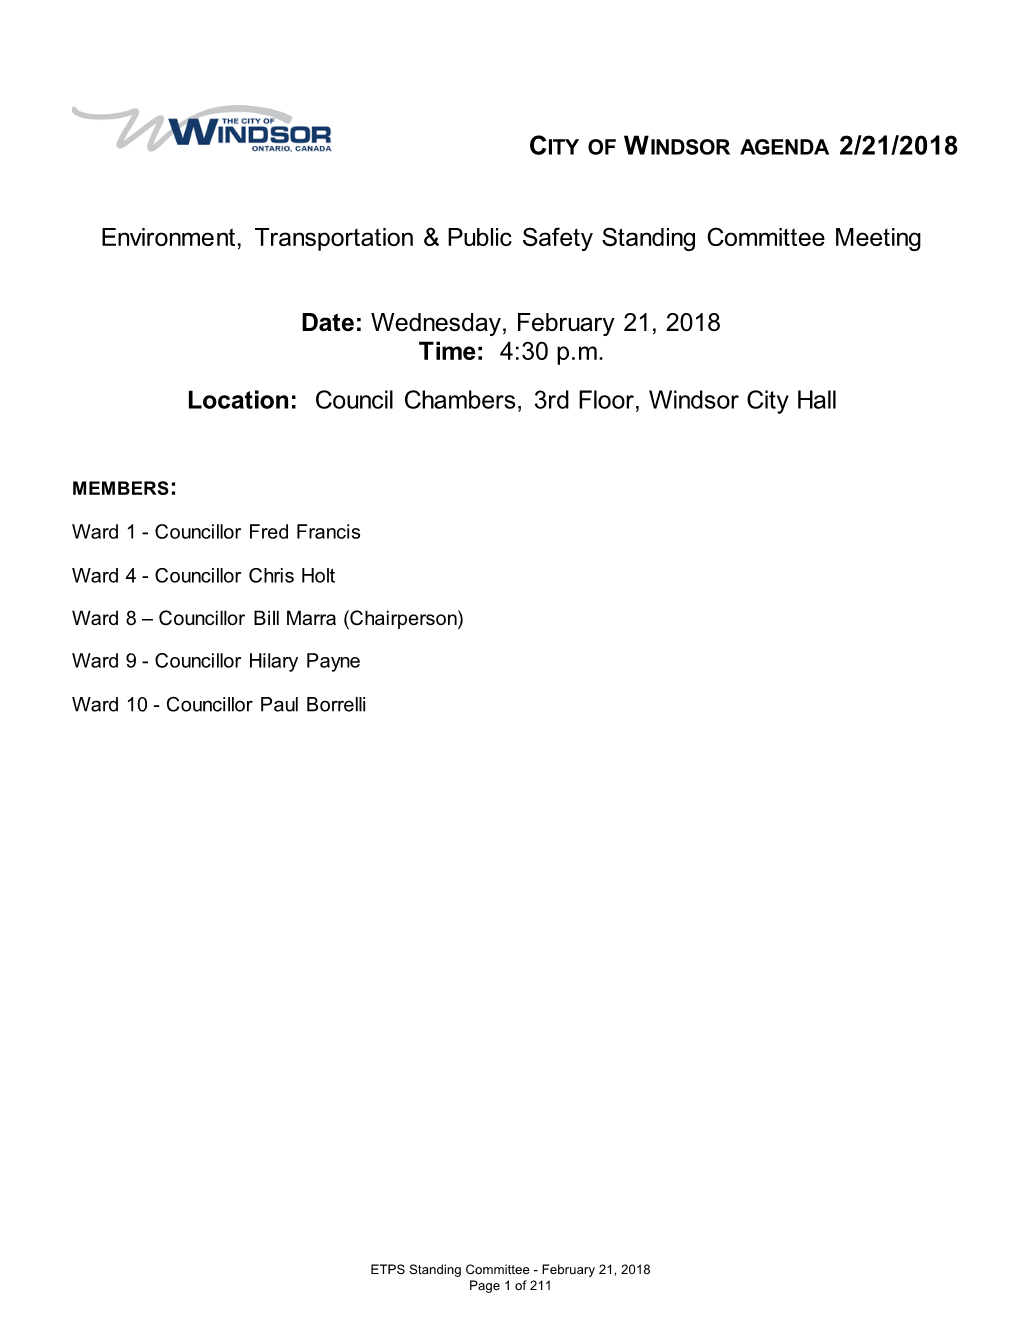 Environment, Transportation & Public Safety Standing Committee Meeting